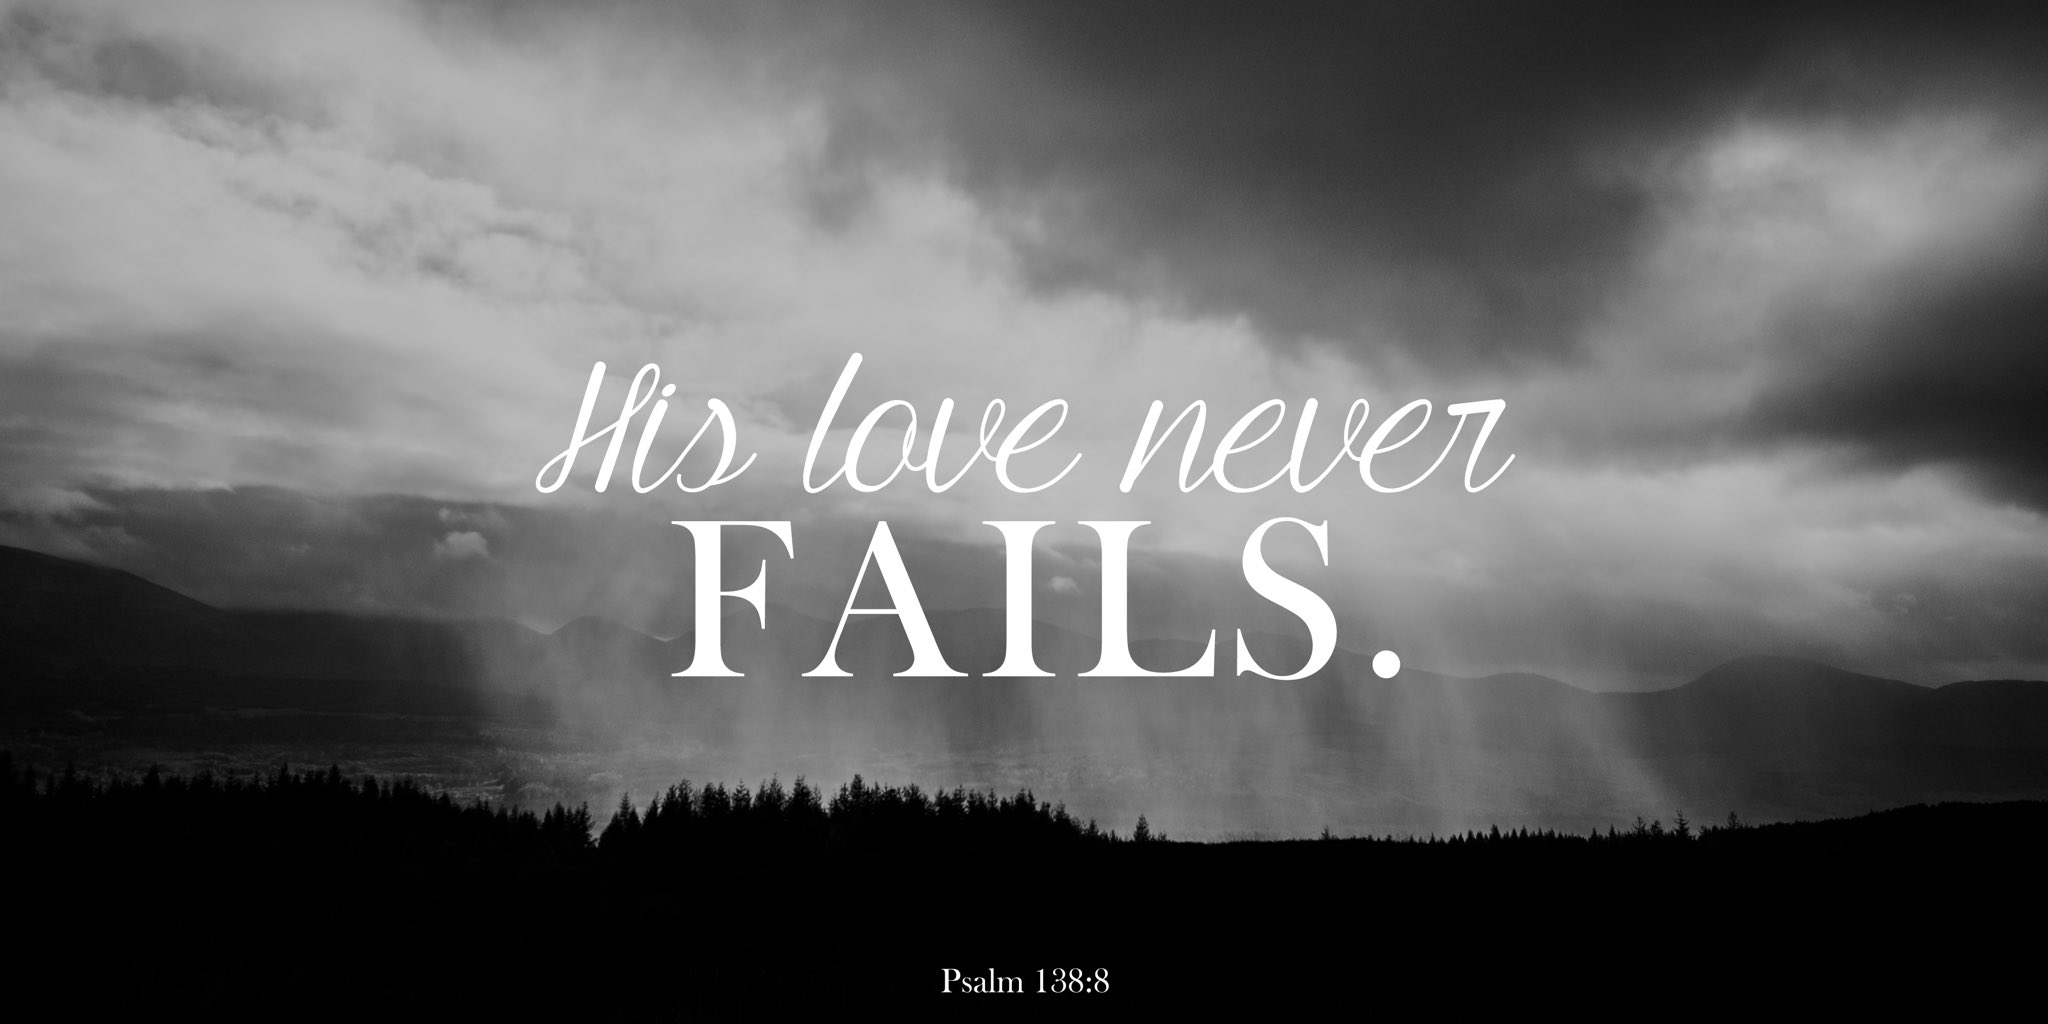 Jesus Culture - You, Lord, will always treat me with kindness. Your love  never fails. - Psalm 138:8